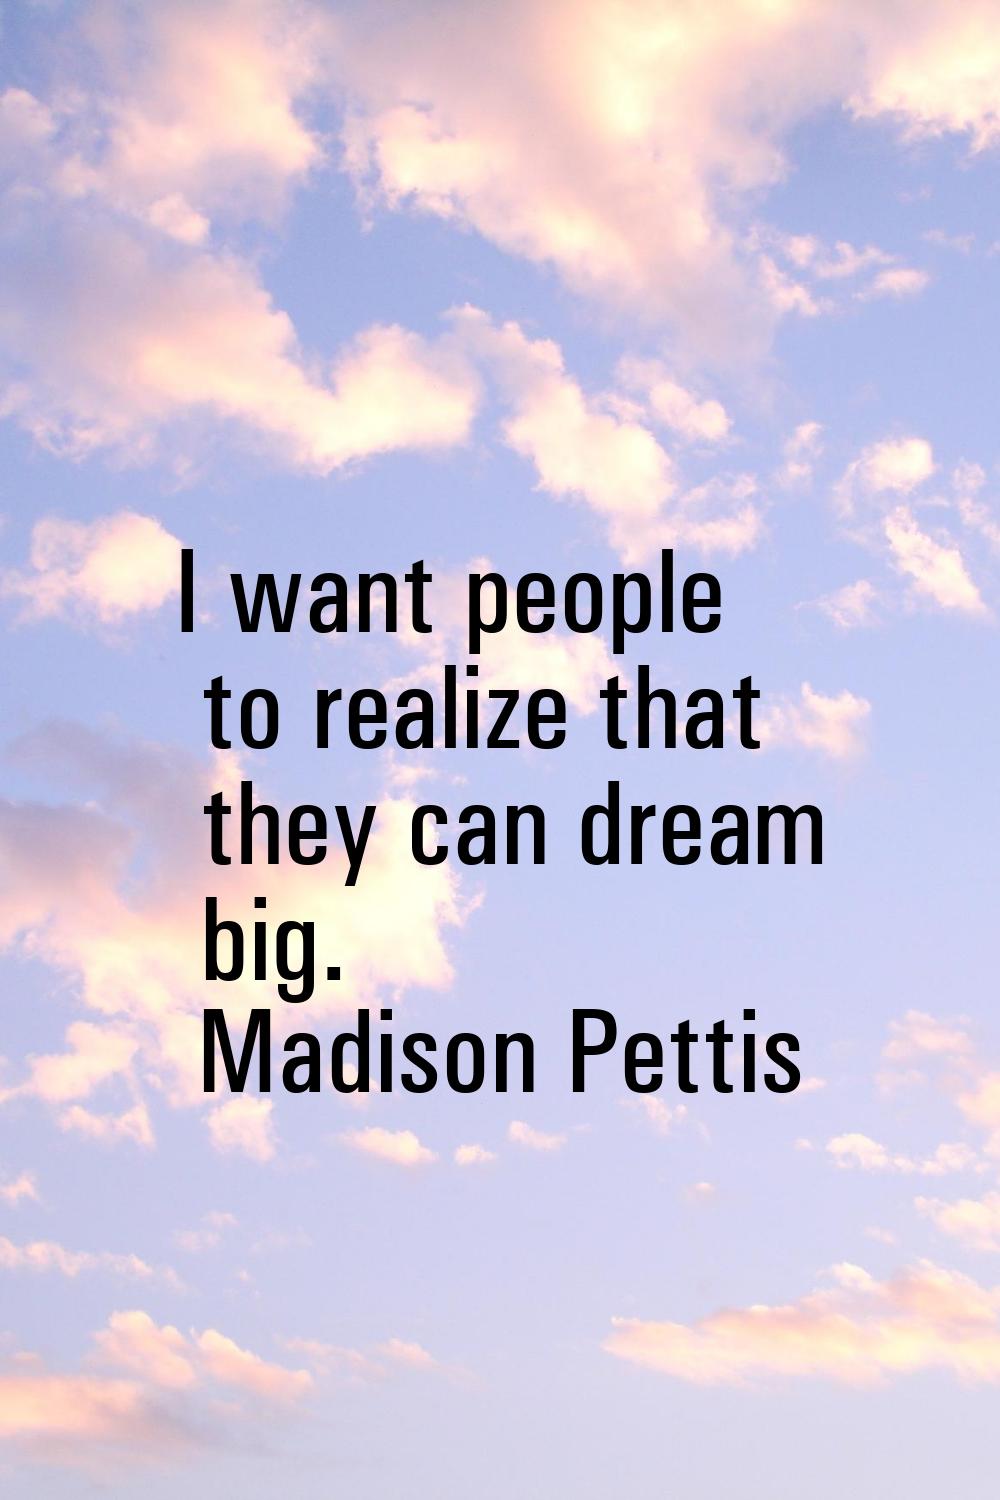 I want people to realize that they can dream big.